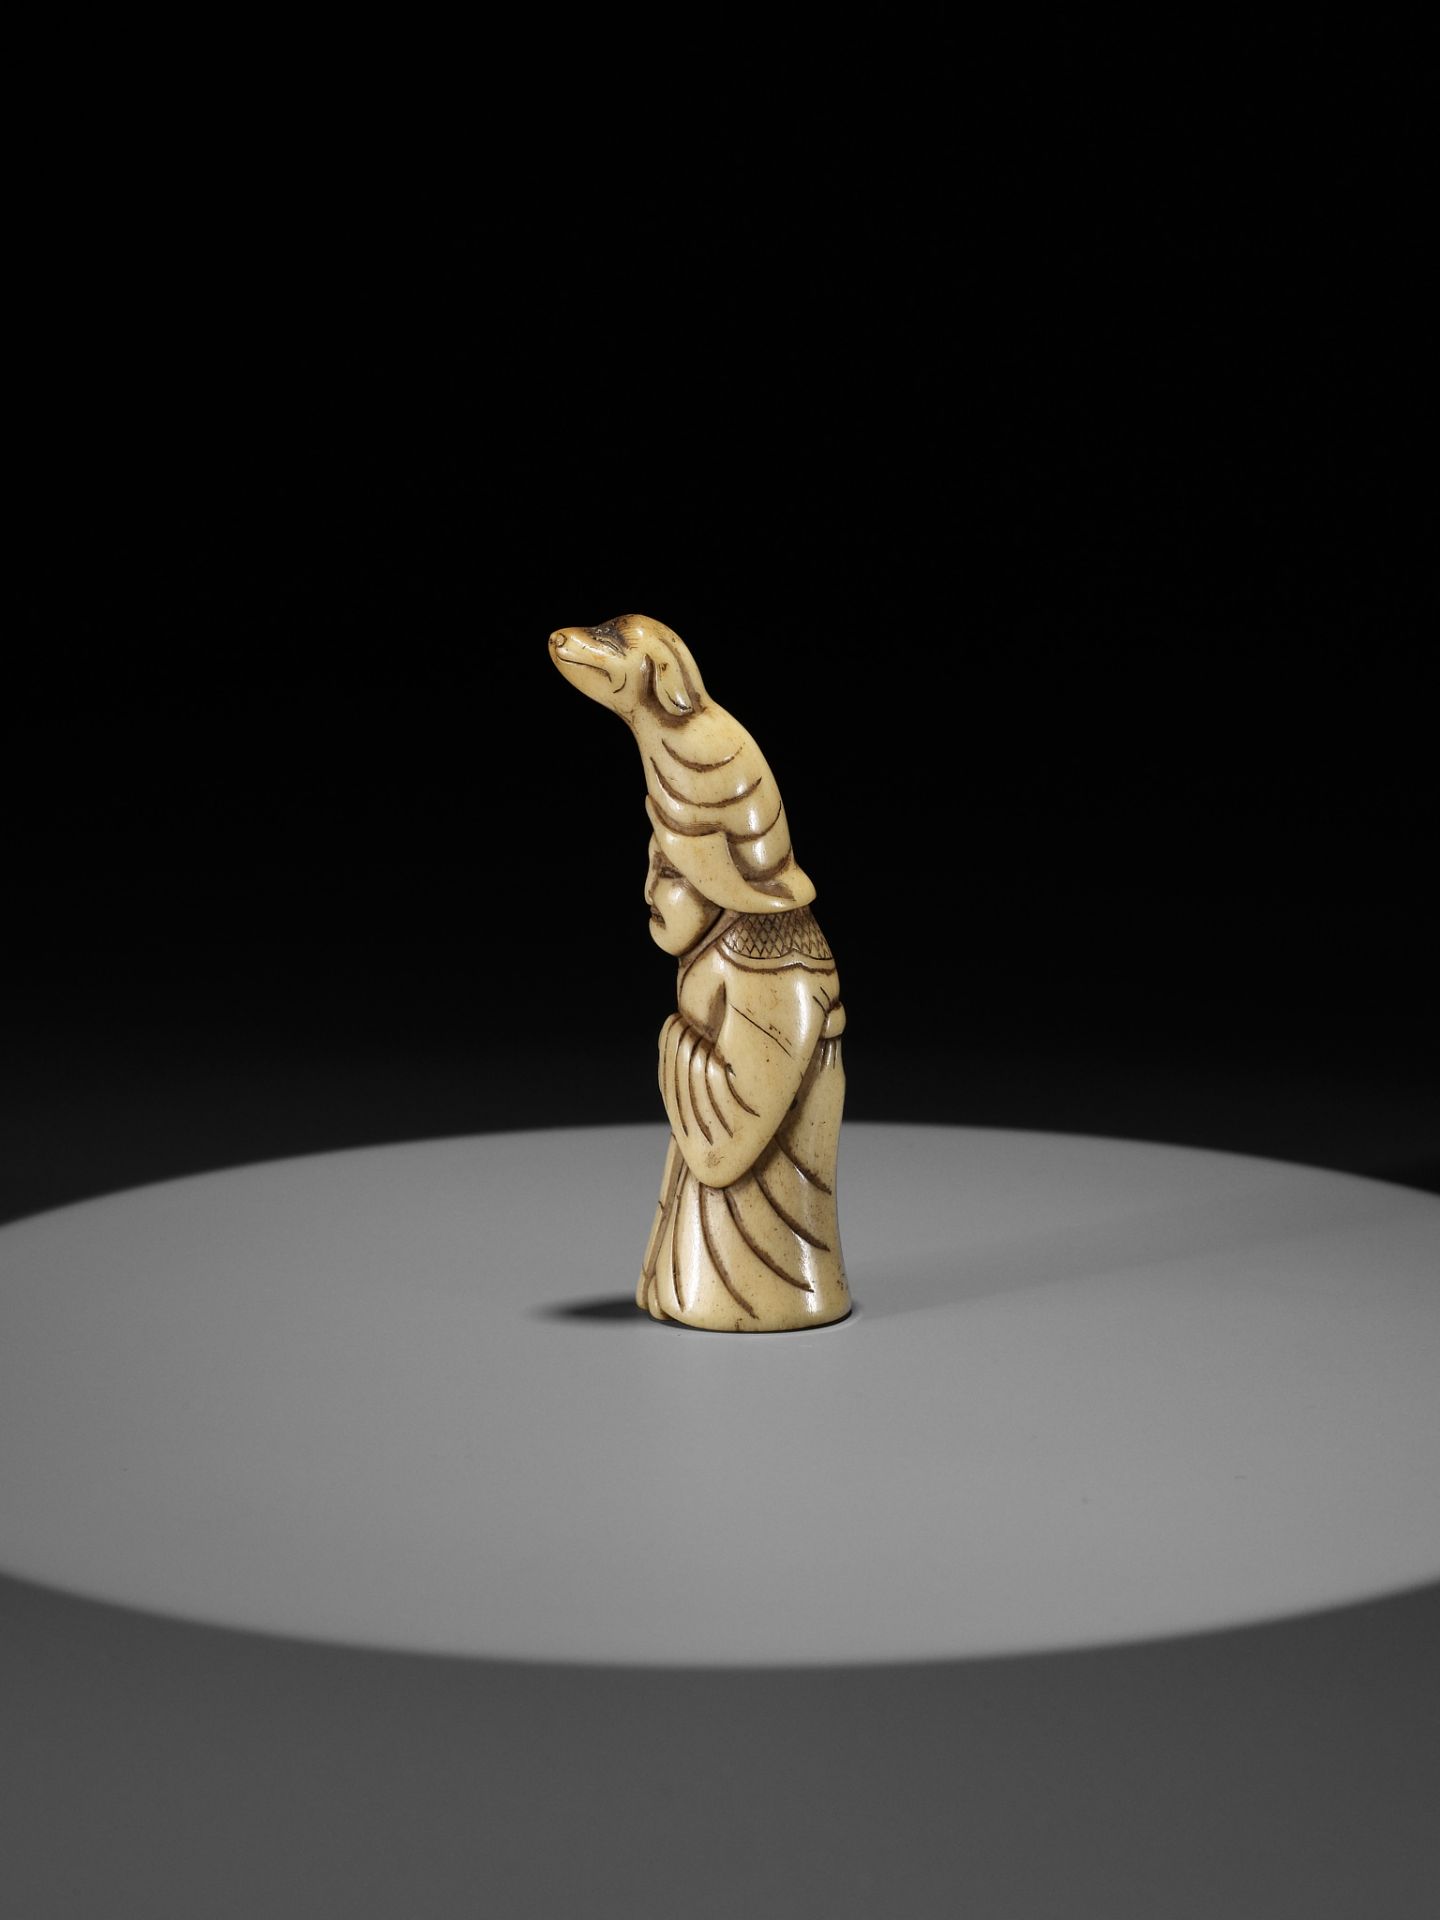 A RARE STAG ANTLER NETSUKE OF A PUPPETEER WITH A DOG PUPPET ON HIS HEAD - Image 3 of 9